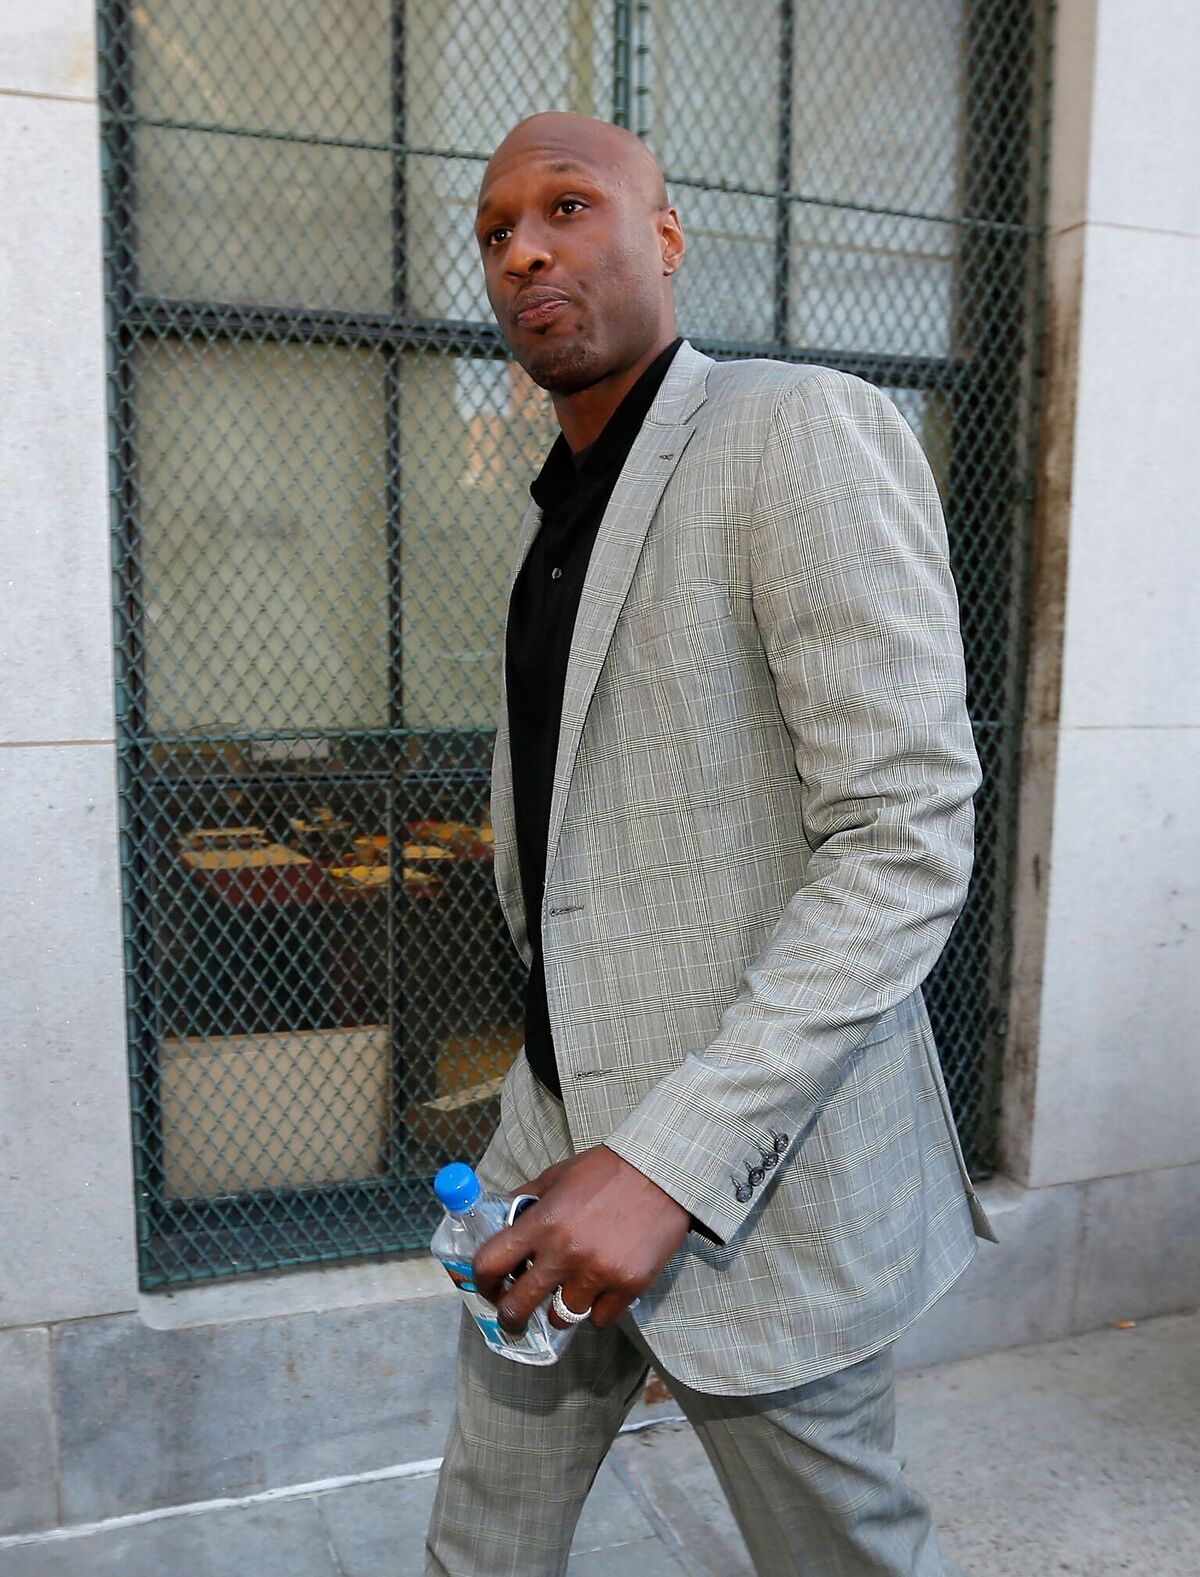 Lamar Odom arrives to attend a custody hearing with ex-girlfriend Liza Morales at New York State Supreme Court on March 5, 2013 in New York Cityv| Photo: Getty Images